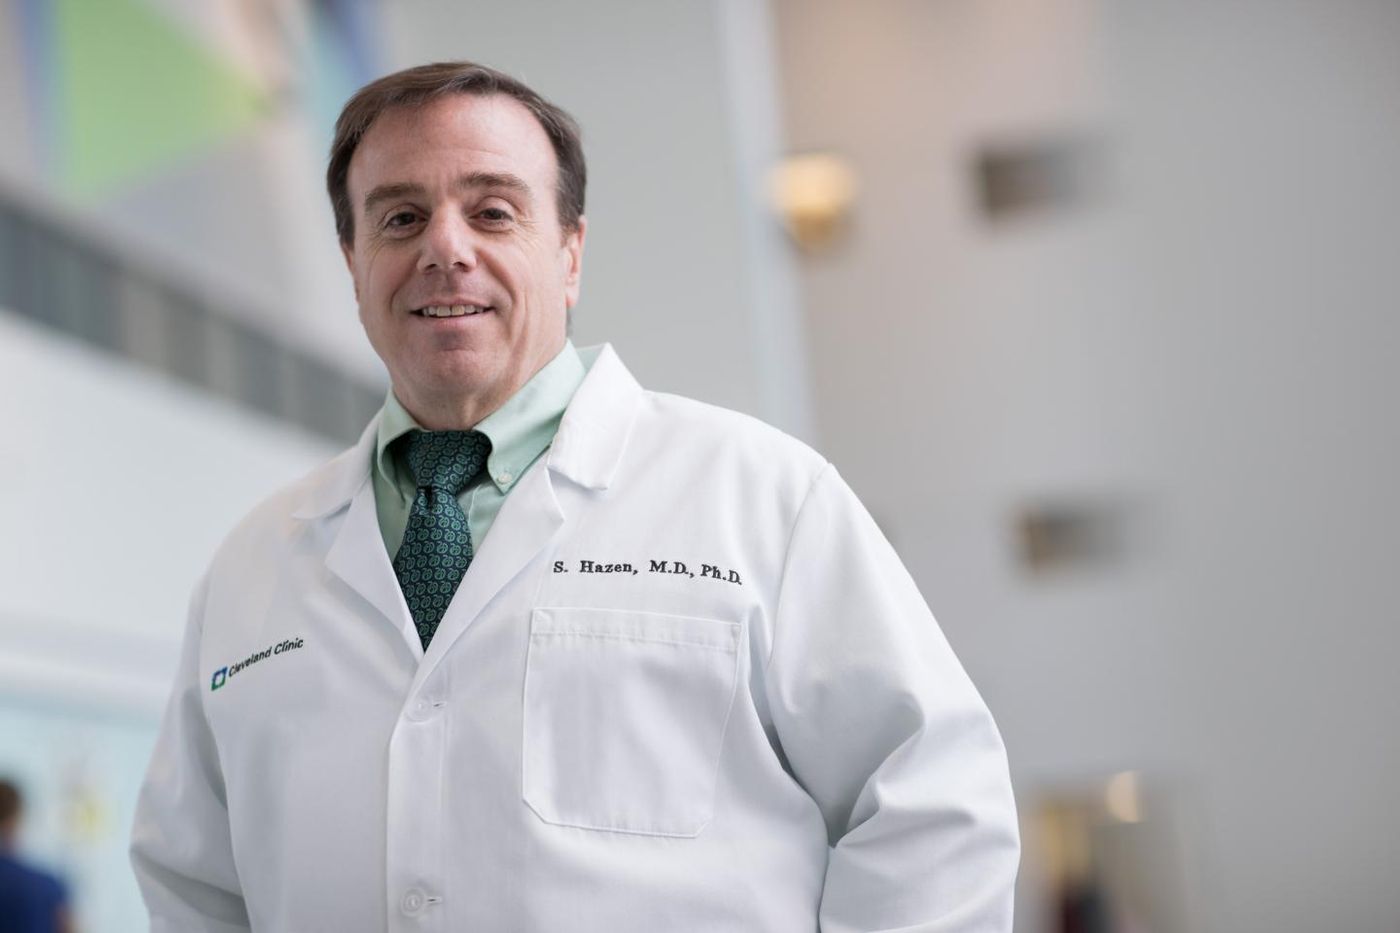 Cleveland Clinic researchers, led by Stanley Hazen, MD, PhD, have identified a gut microbe generated byproduct - phenylacetylglutamine (PAG) -that is linked to development of cardiovascular disease, including heart attack, stroke and death.  / Credit: Cleveland Clinic